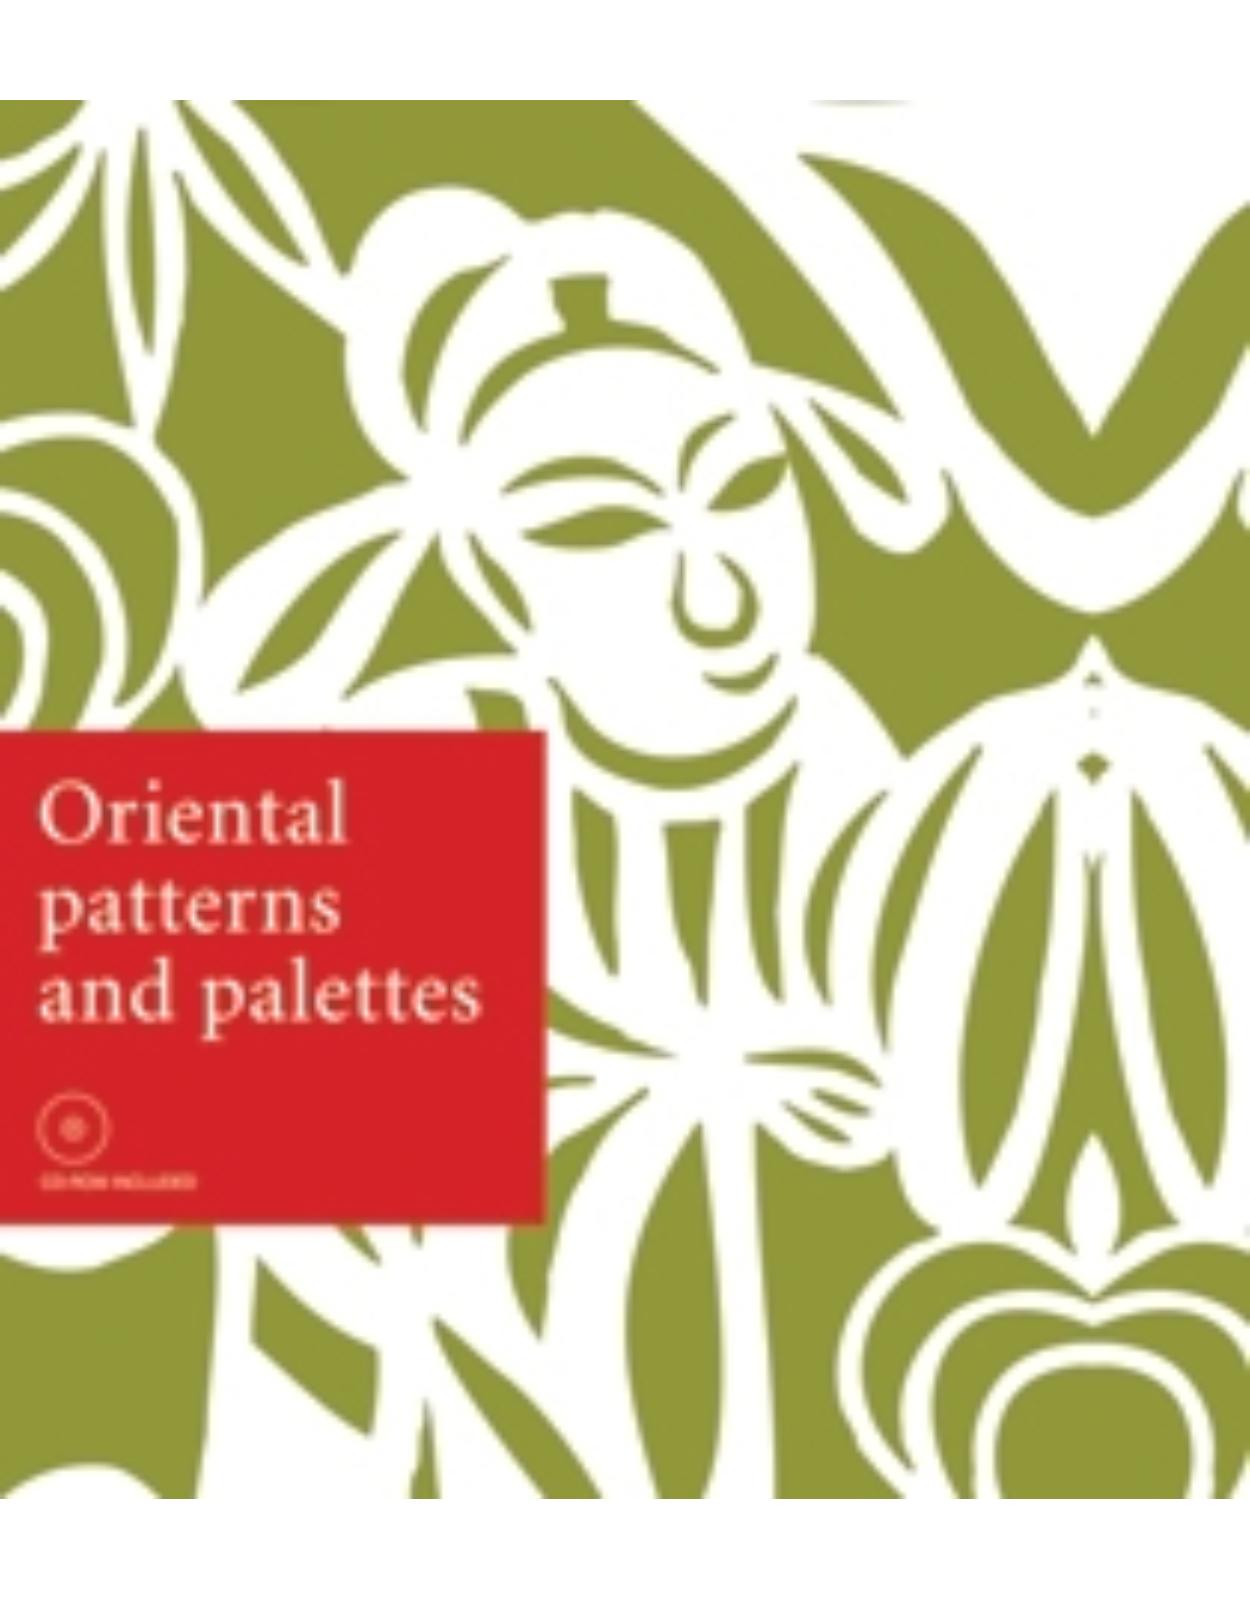 Oriental patterns and palettes